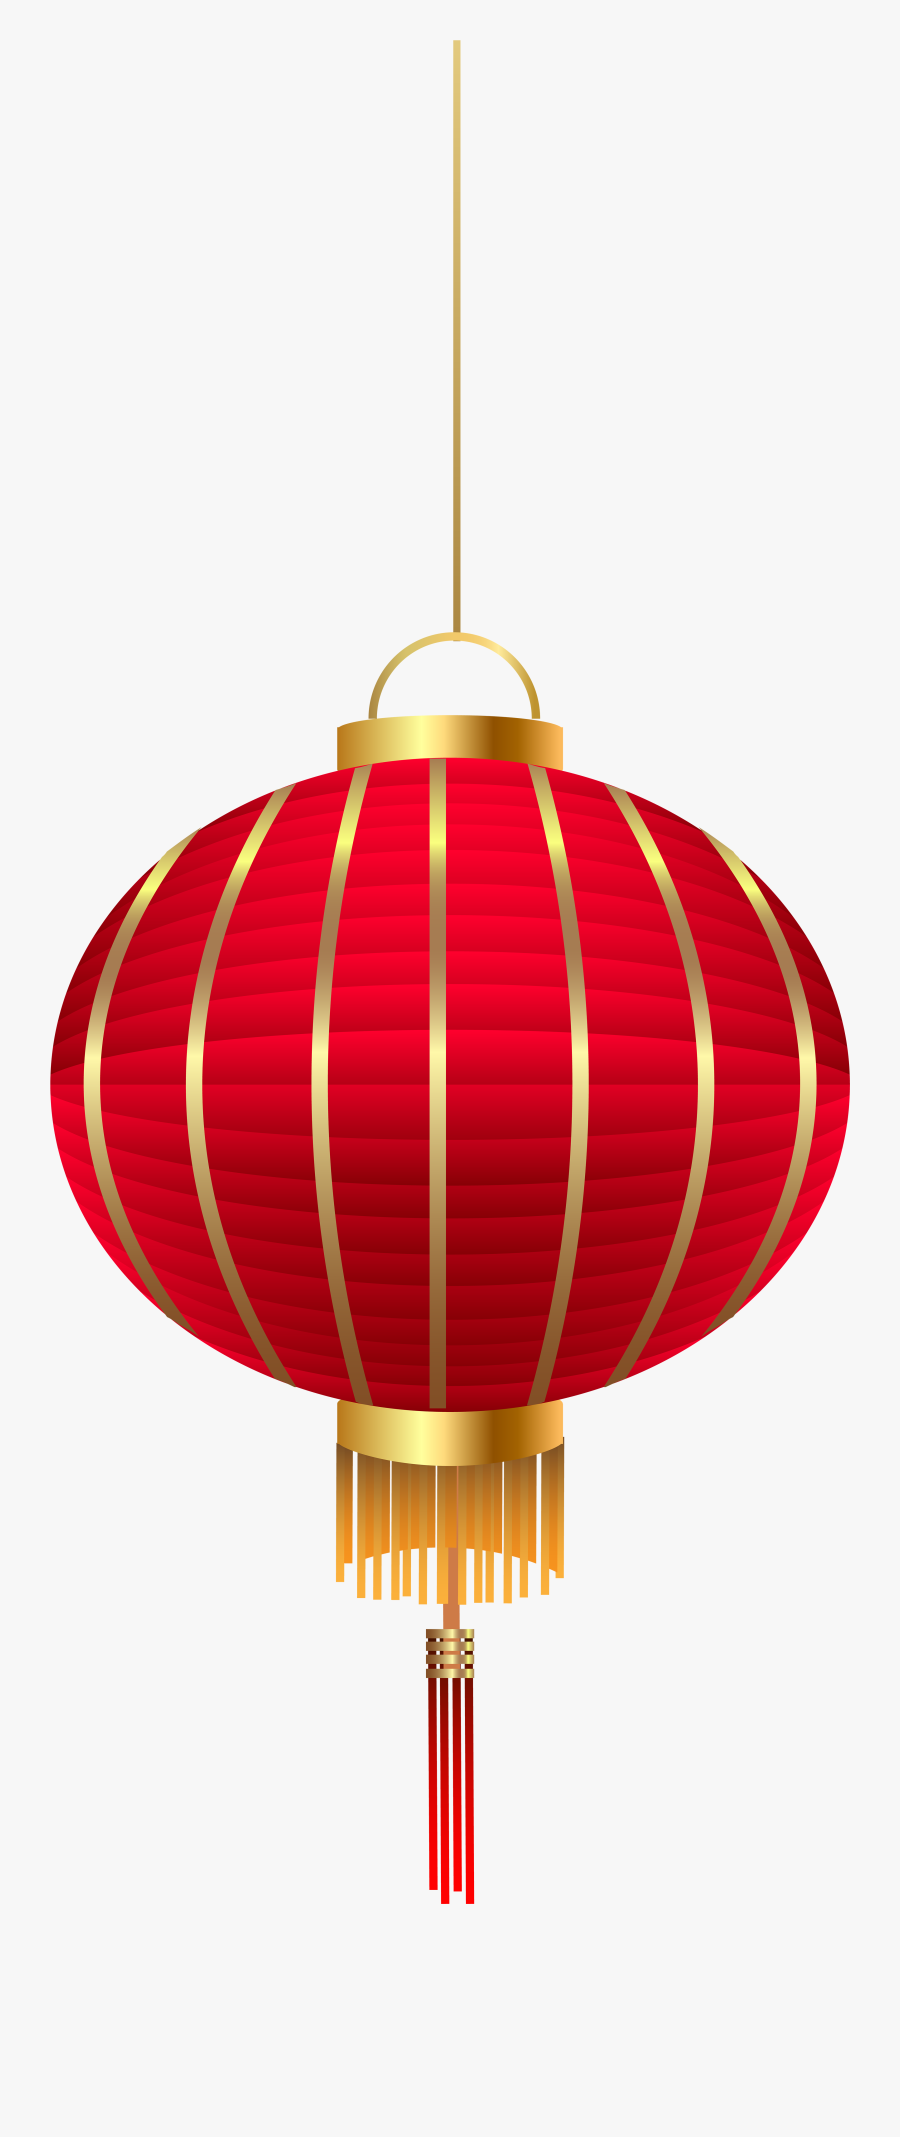 Chinese Clipart Light Chinese - Chinese Red Lanterns Transparent, Transparent Clipart